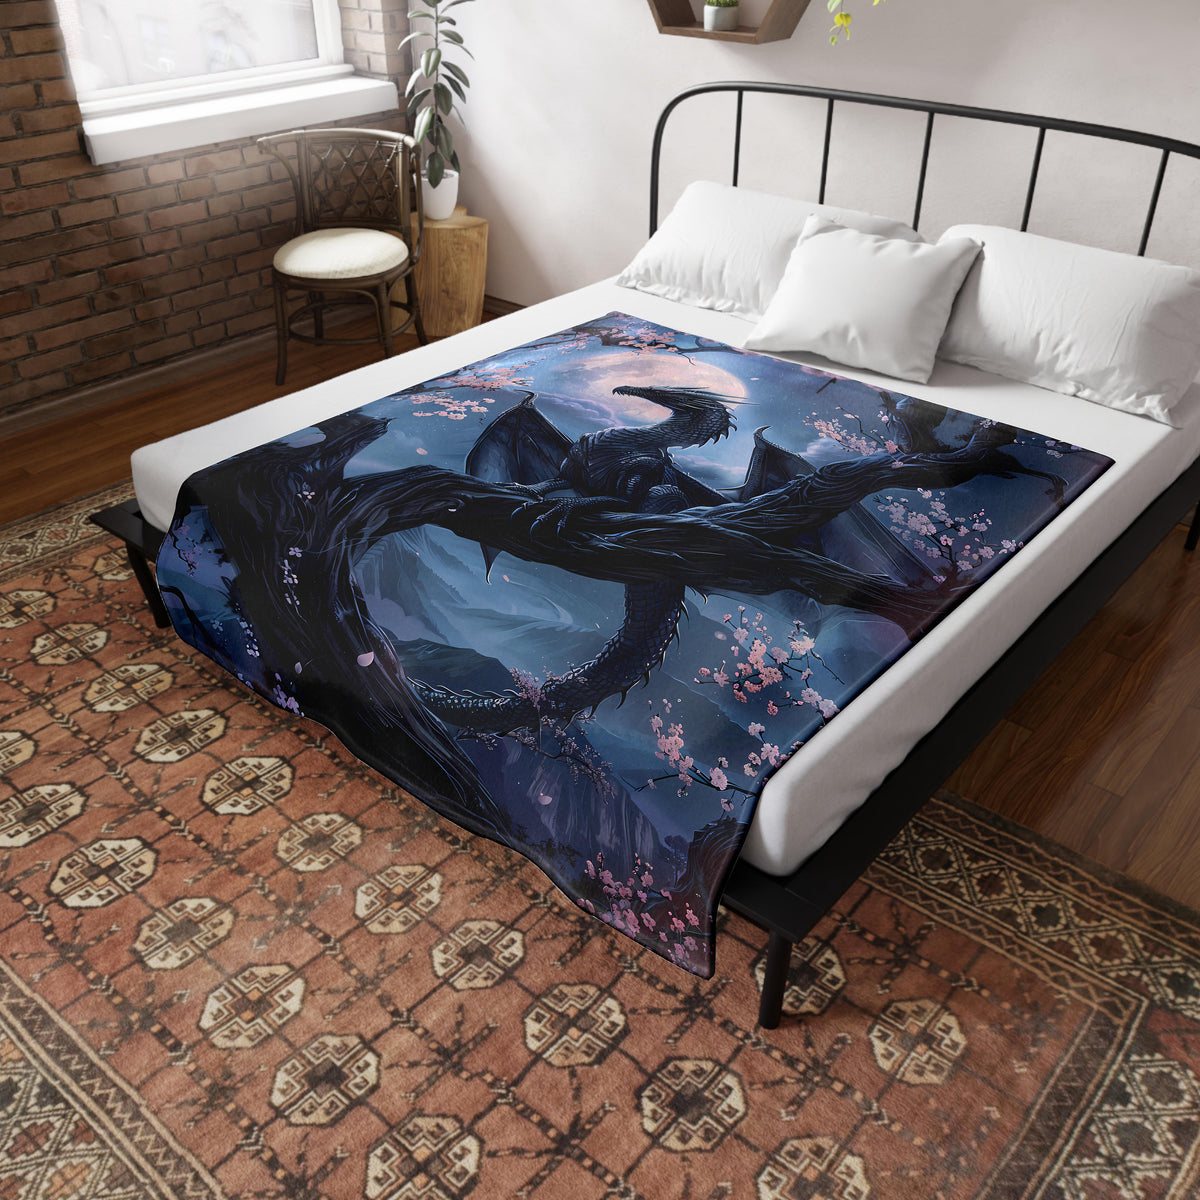 a bed with a dragon comforter on top of it